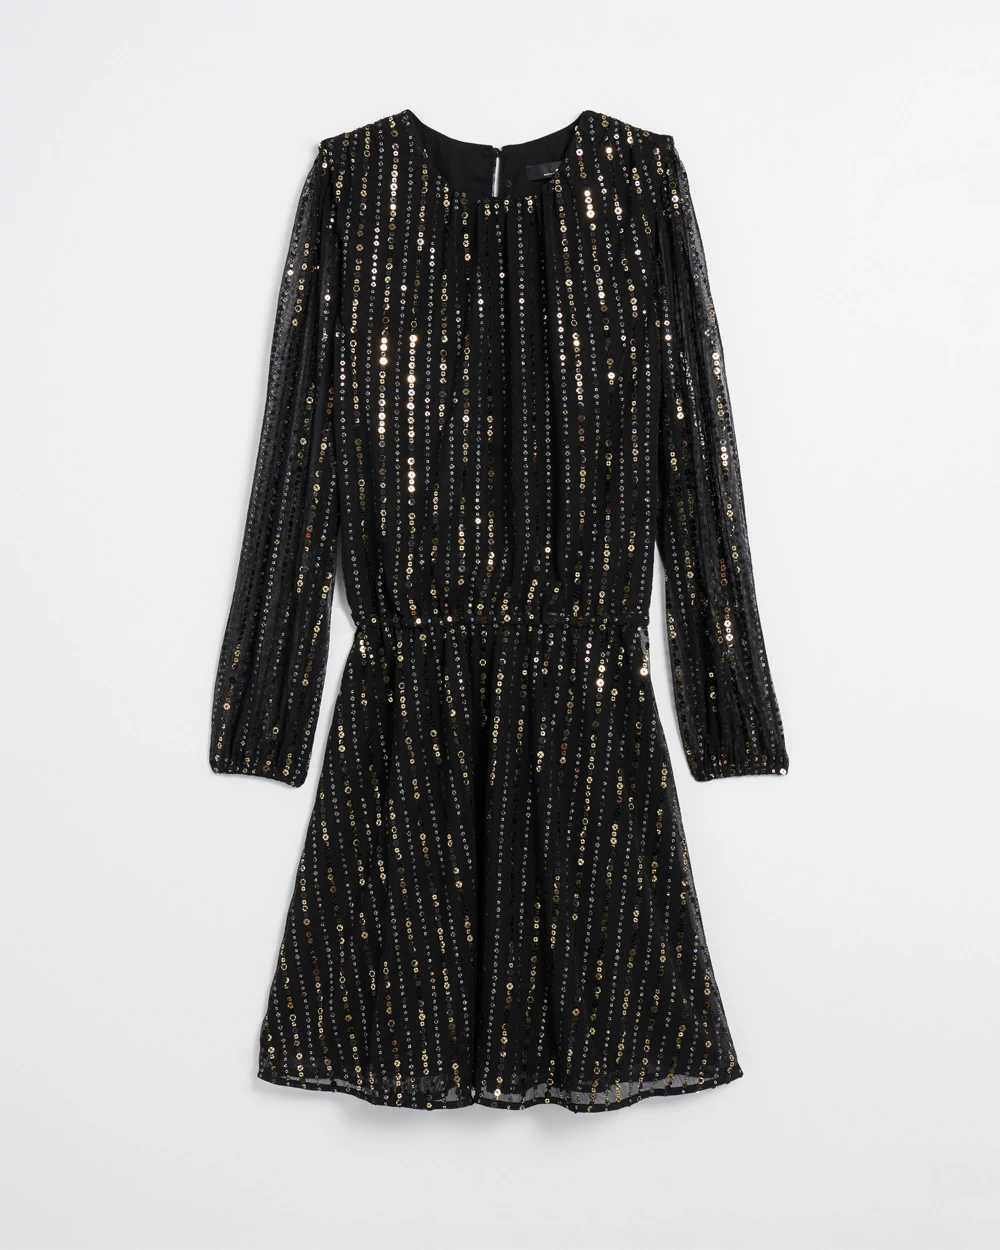 Long-Sleeve Sequin Blouson Dress click to view larger image.